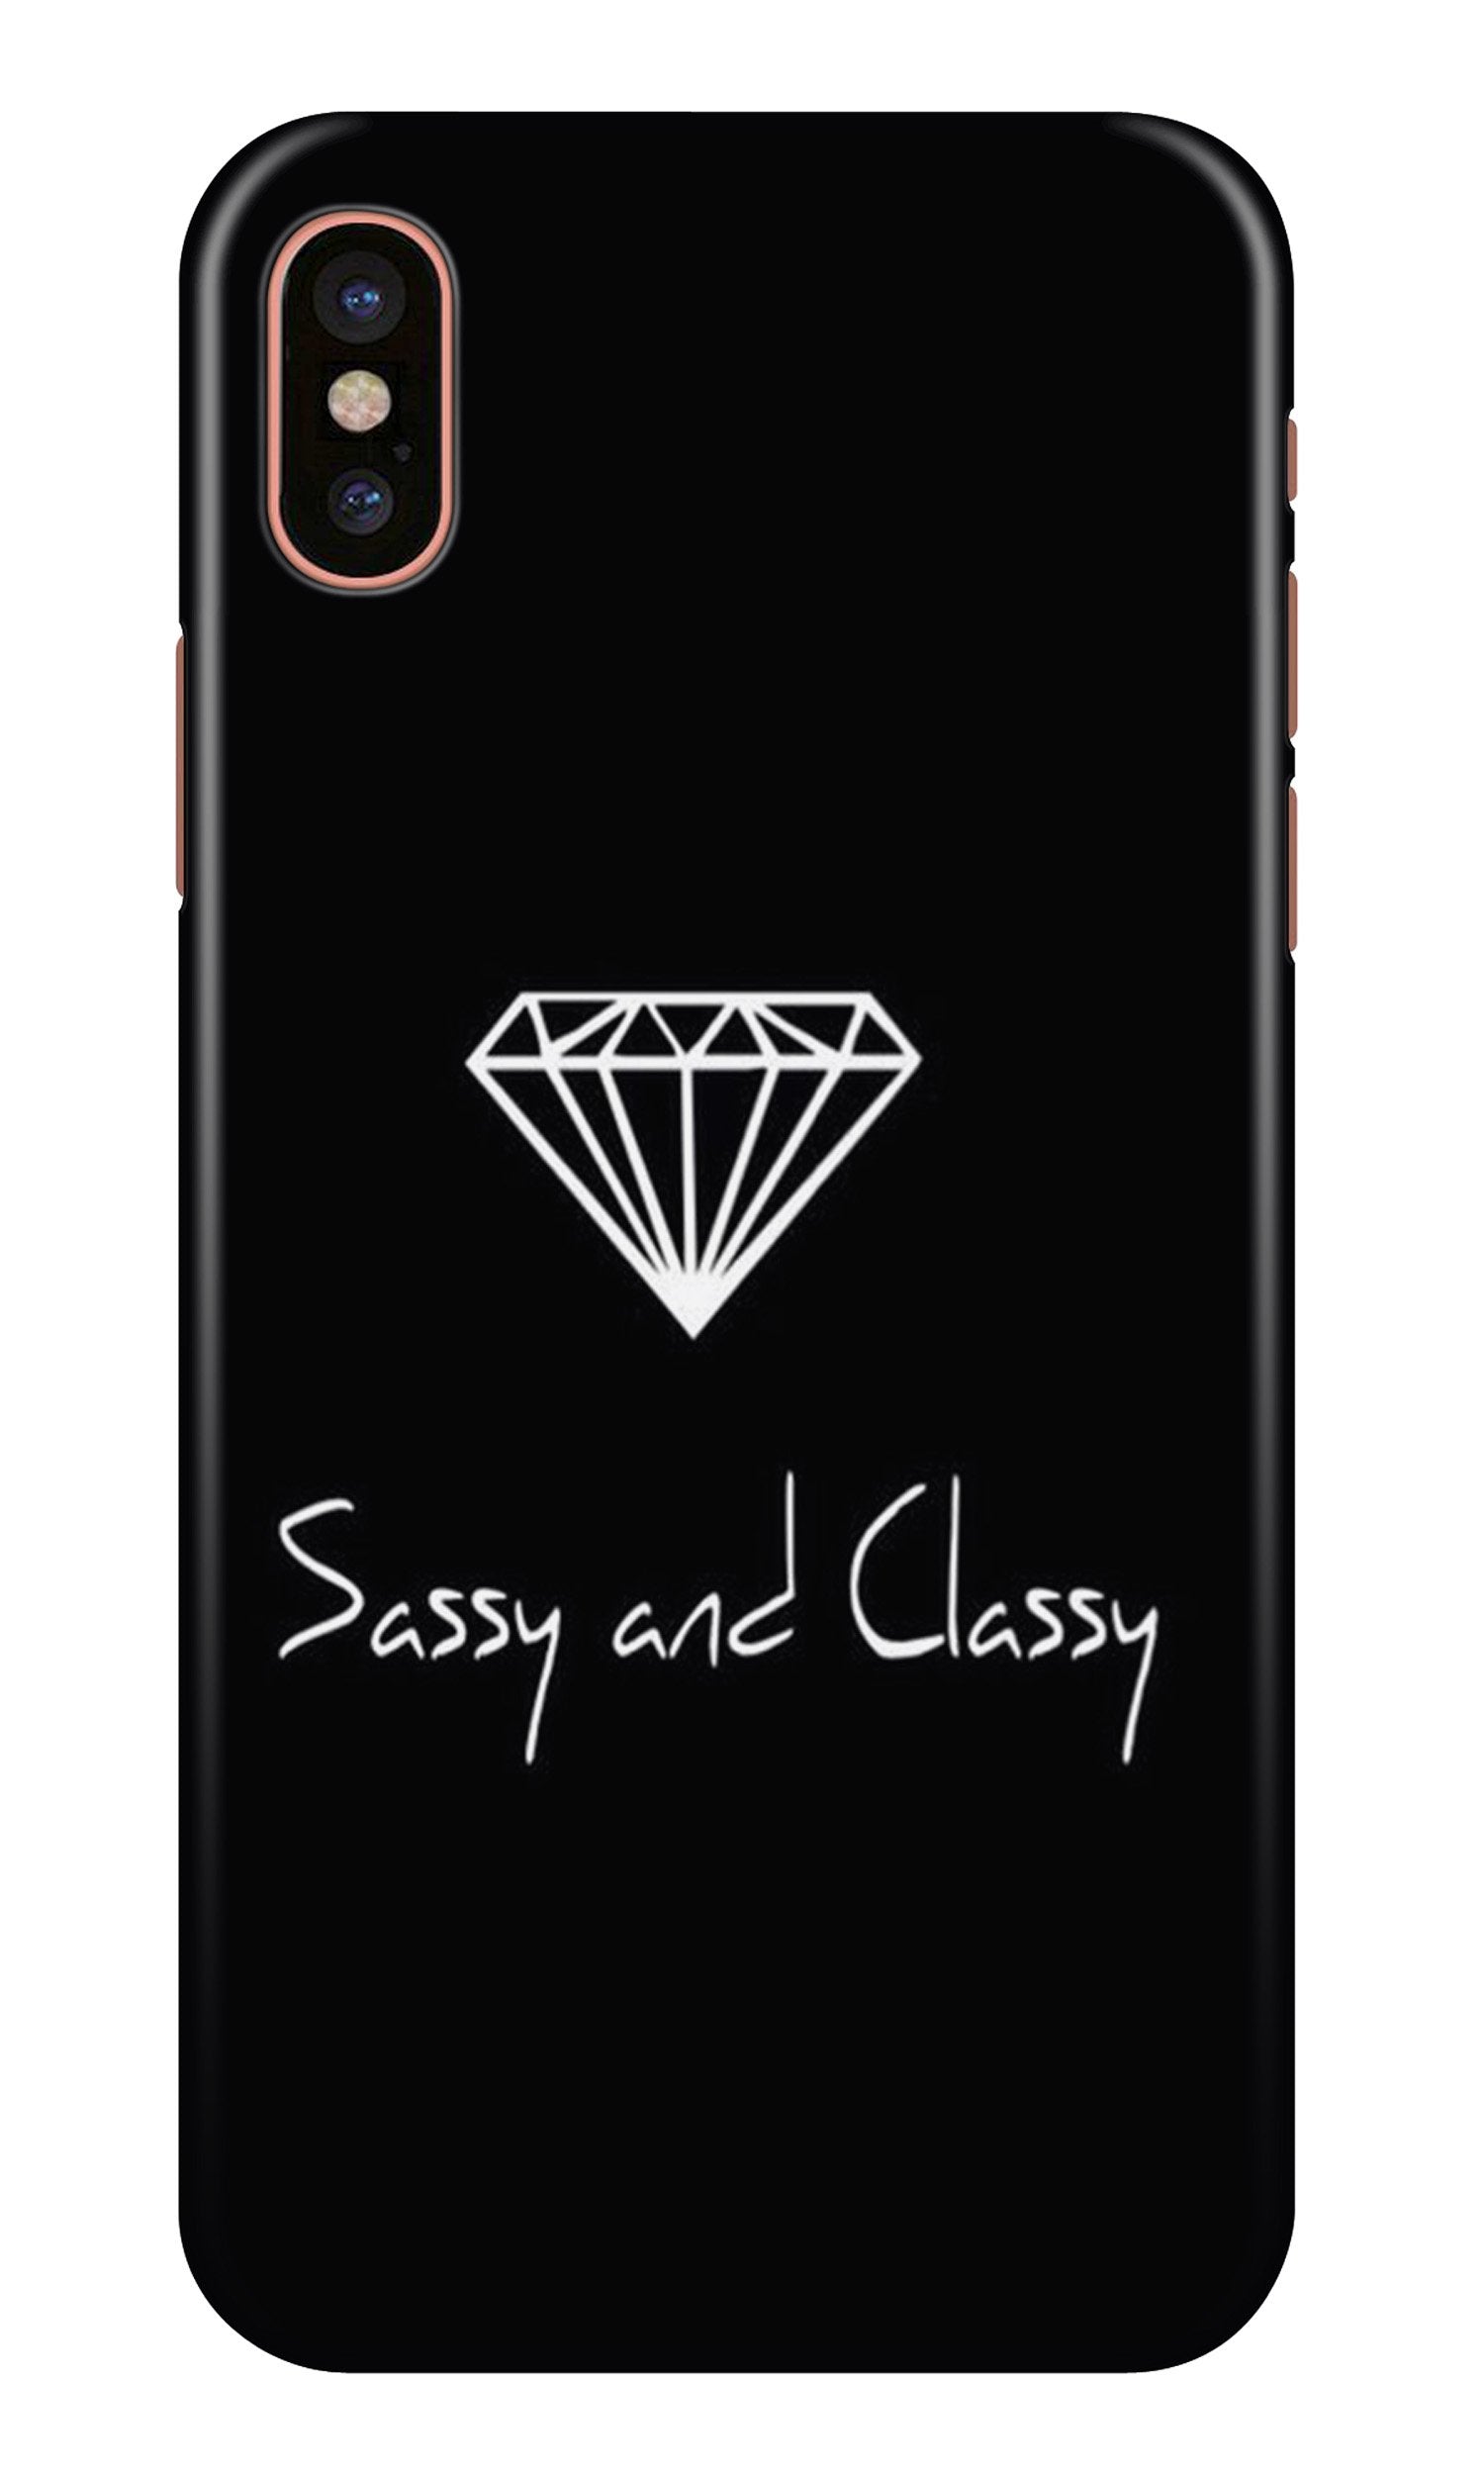 Sassy and Classy Case for iPhone Xs (Design No. 264)